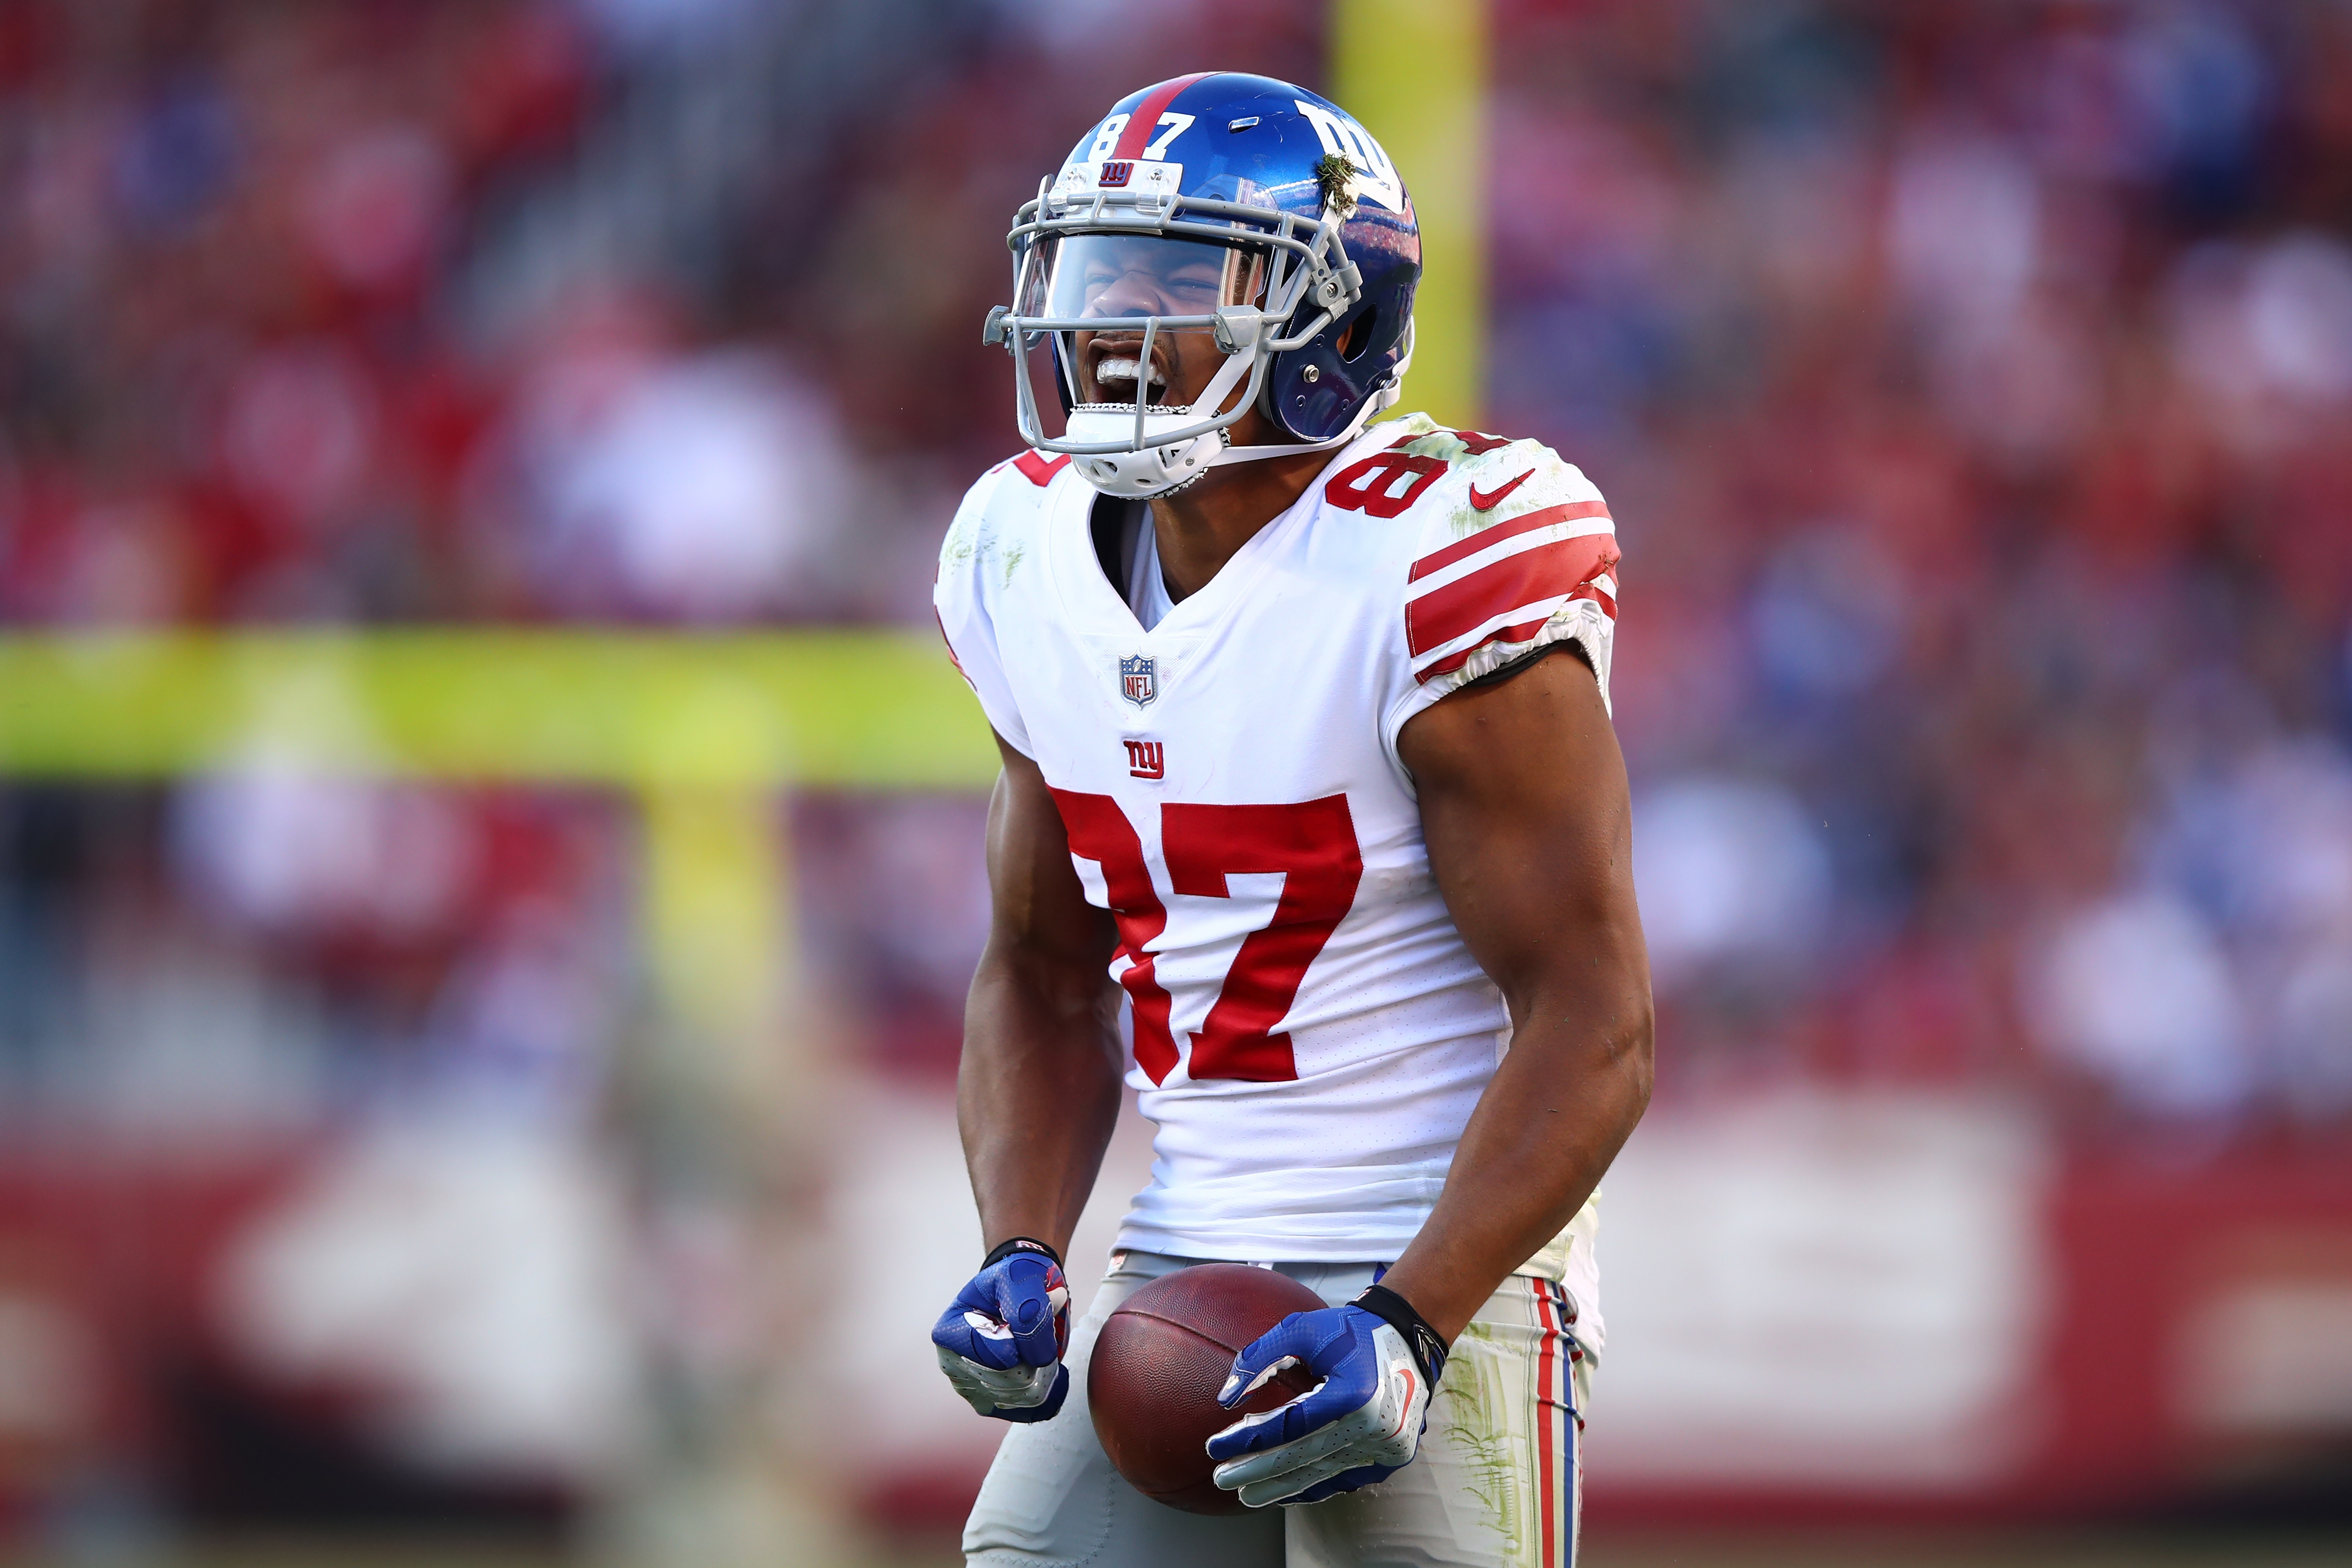 When should the New York Giants trade Sterling Shepard?